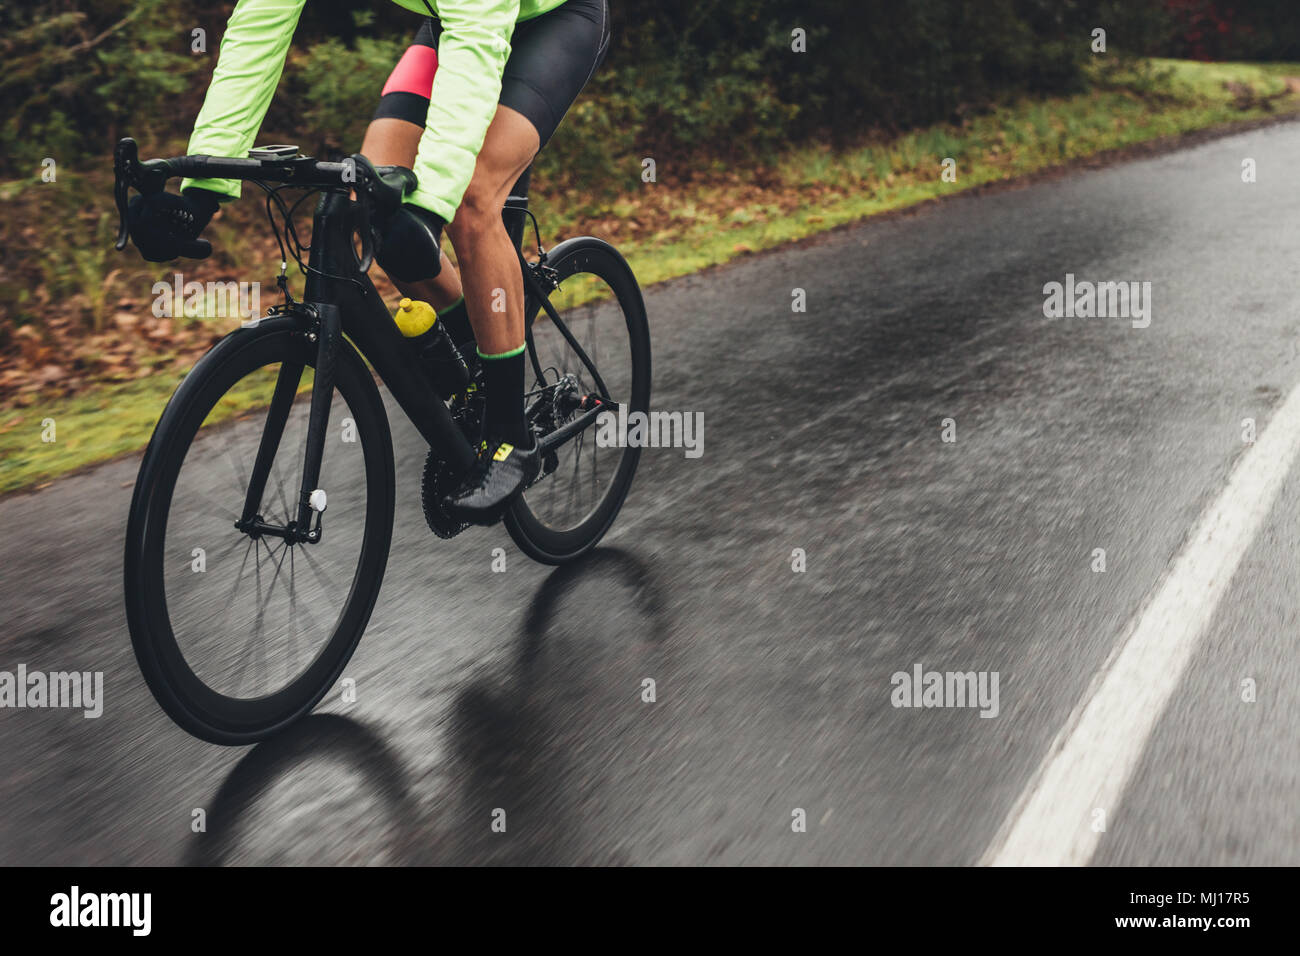 Male athlete in cycling gear riding bike on wet road. Low section shot of cyclist training outdoors on a rainy day. Stock Photo